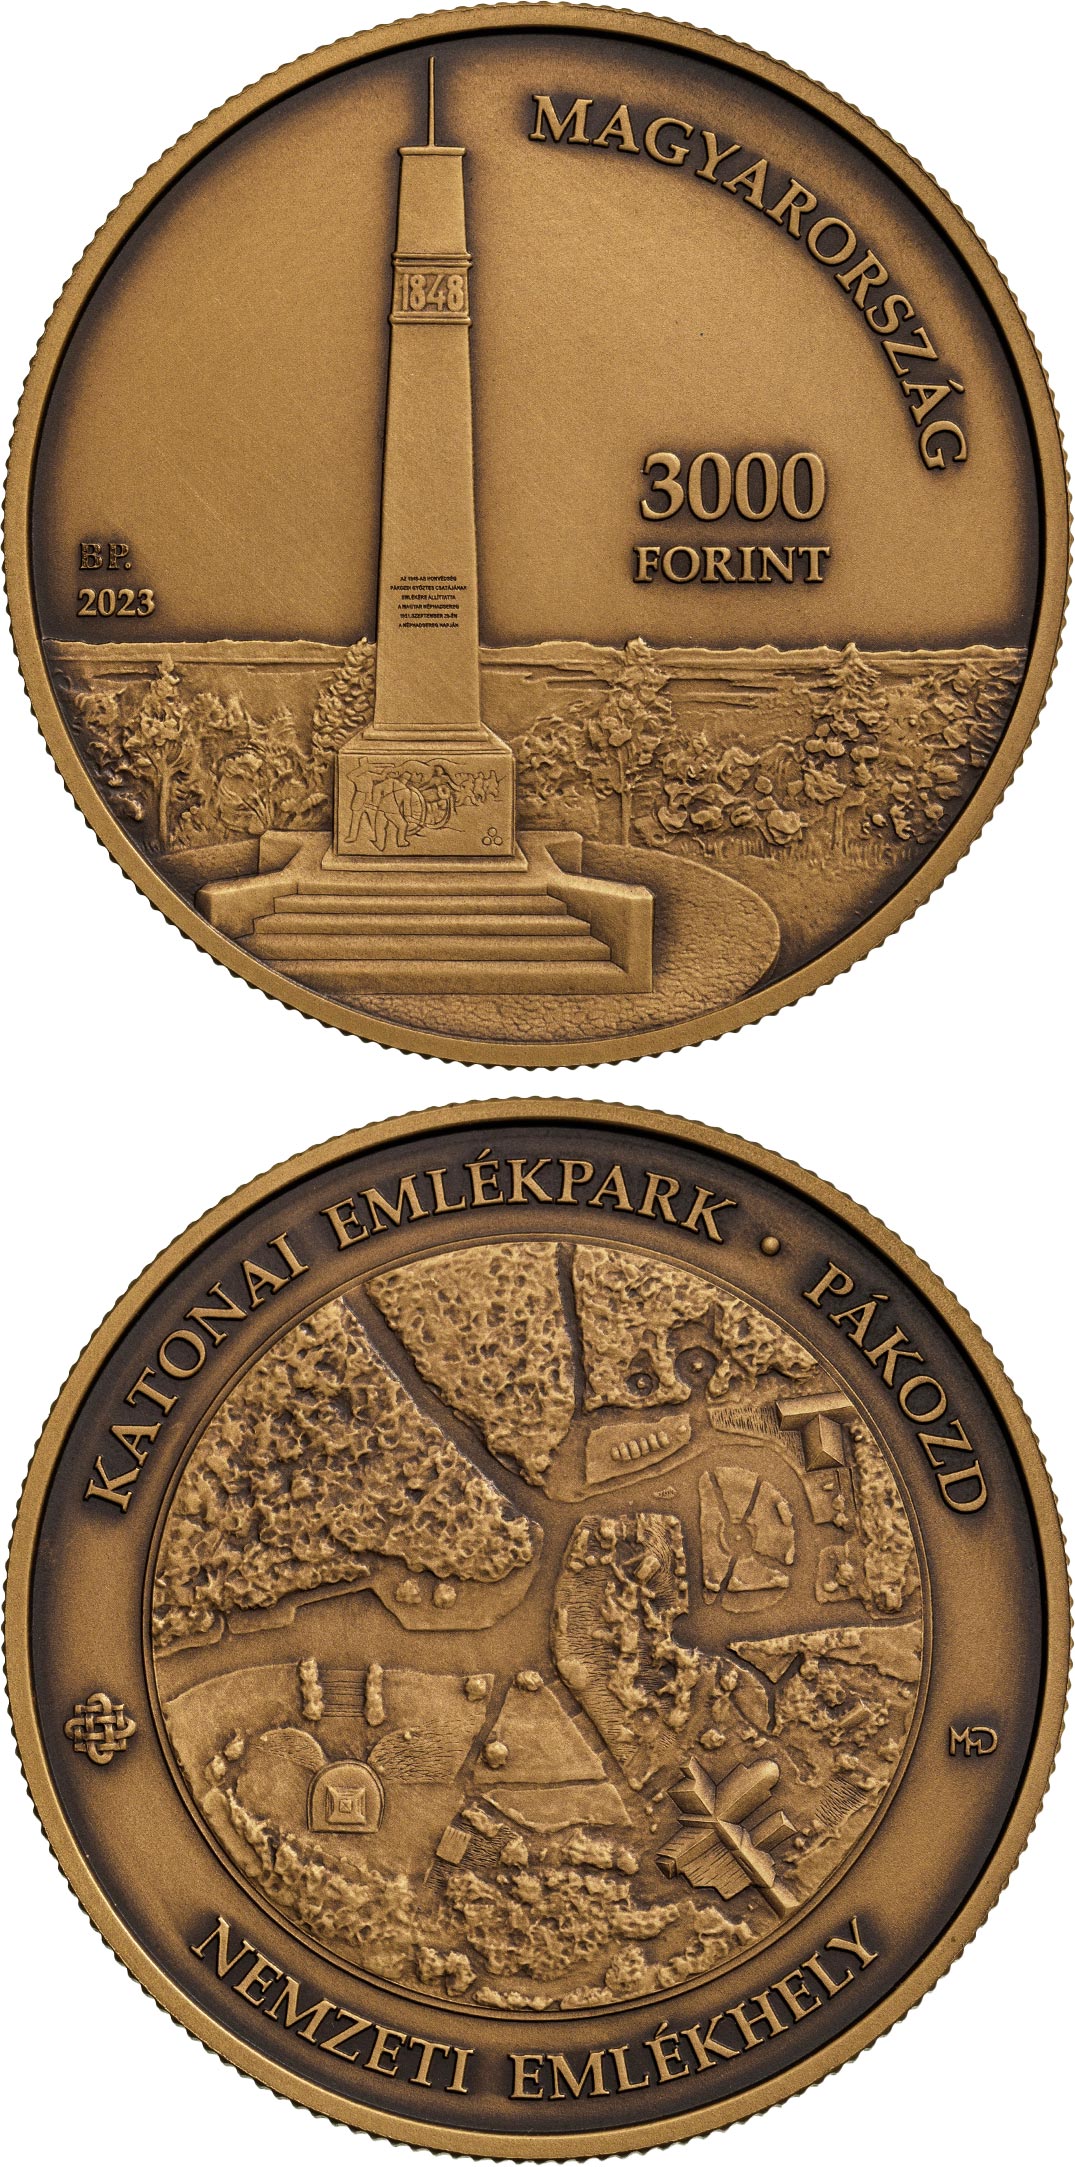 Image of 3000 forint coin - Military Memorial Park, Pákozd | Hungary 2023